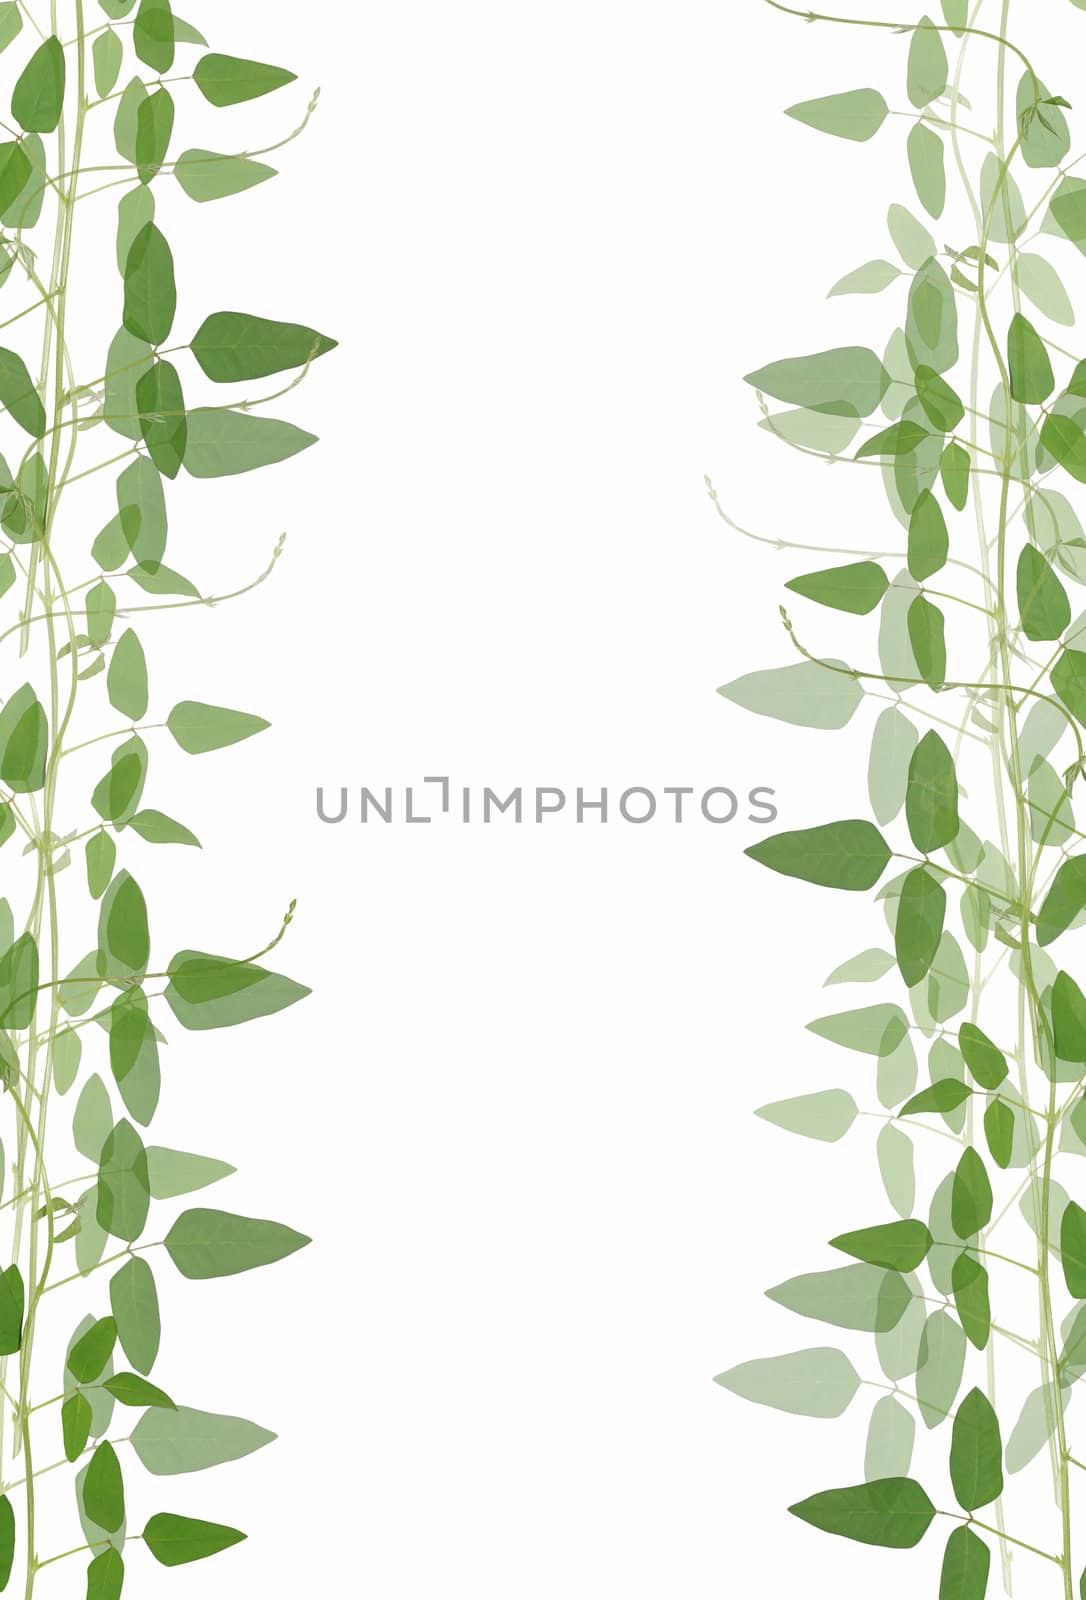 Border of green leaves against white background with space for c by rufous